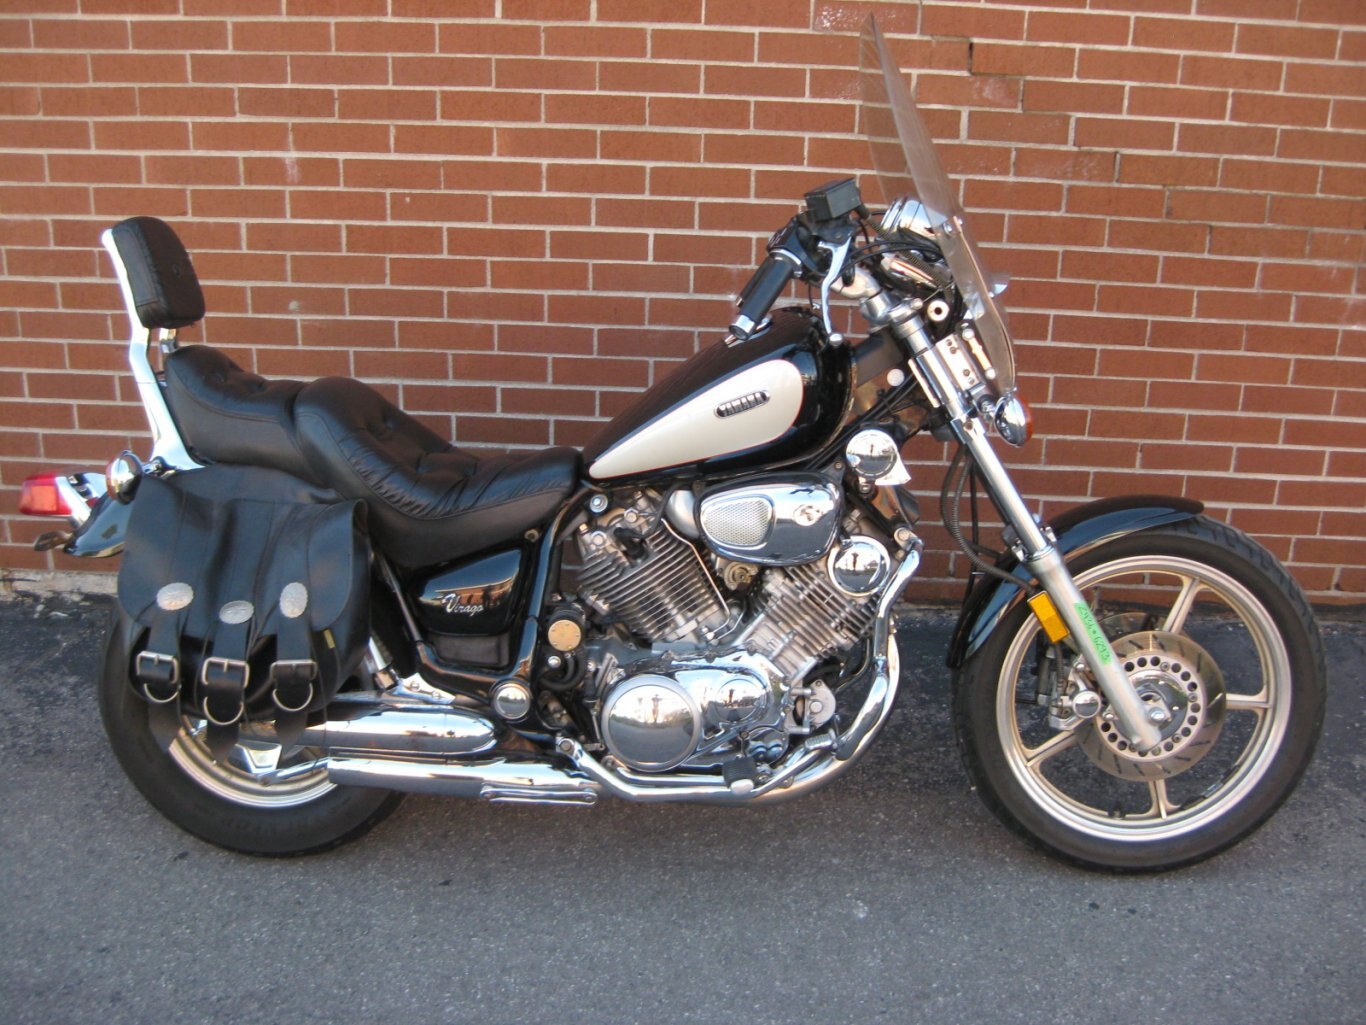 1993 XV1100 Virago SOLD CONGRATULATIONS TO BRYANT A FUTURE ROAD WARRIOR !! WELCOME BACK TO THE COMMUNITY OF MOTORCYCLING ON THIS RETRO CRUISER STYLE TWO WHEEL FREEDOM MACHINE WITH THANKS FROM GARY & TEAM CYCLE WORLD!!!!